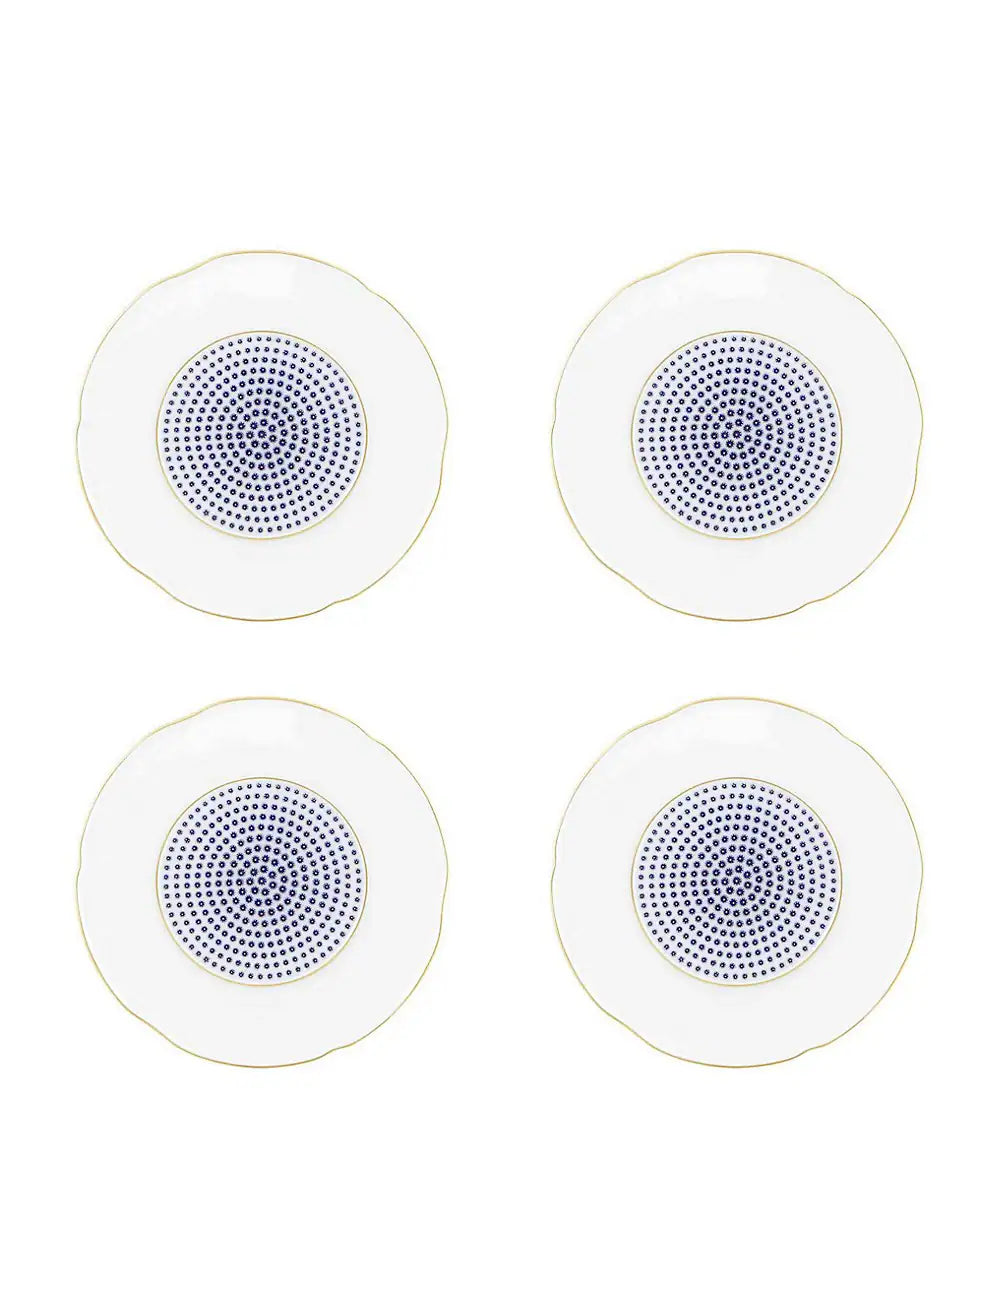 Vista Alegre Constellation d'Or Bread and Butter Plate, Set of 4